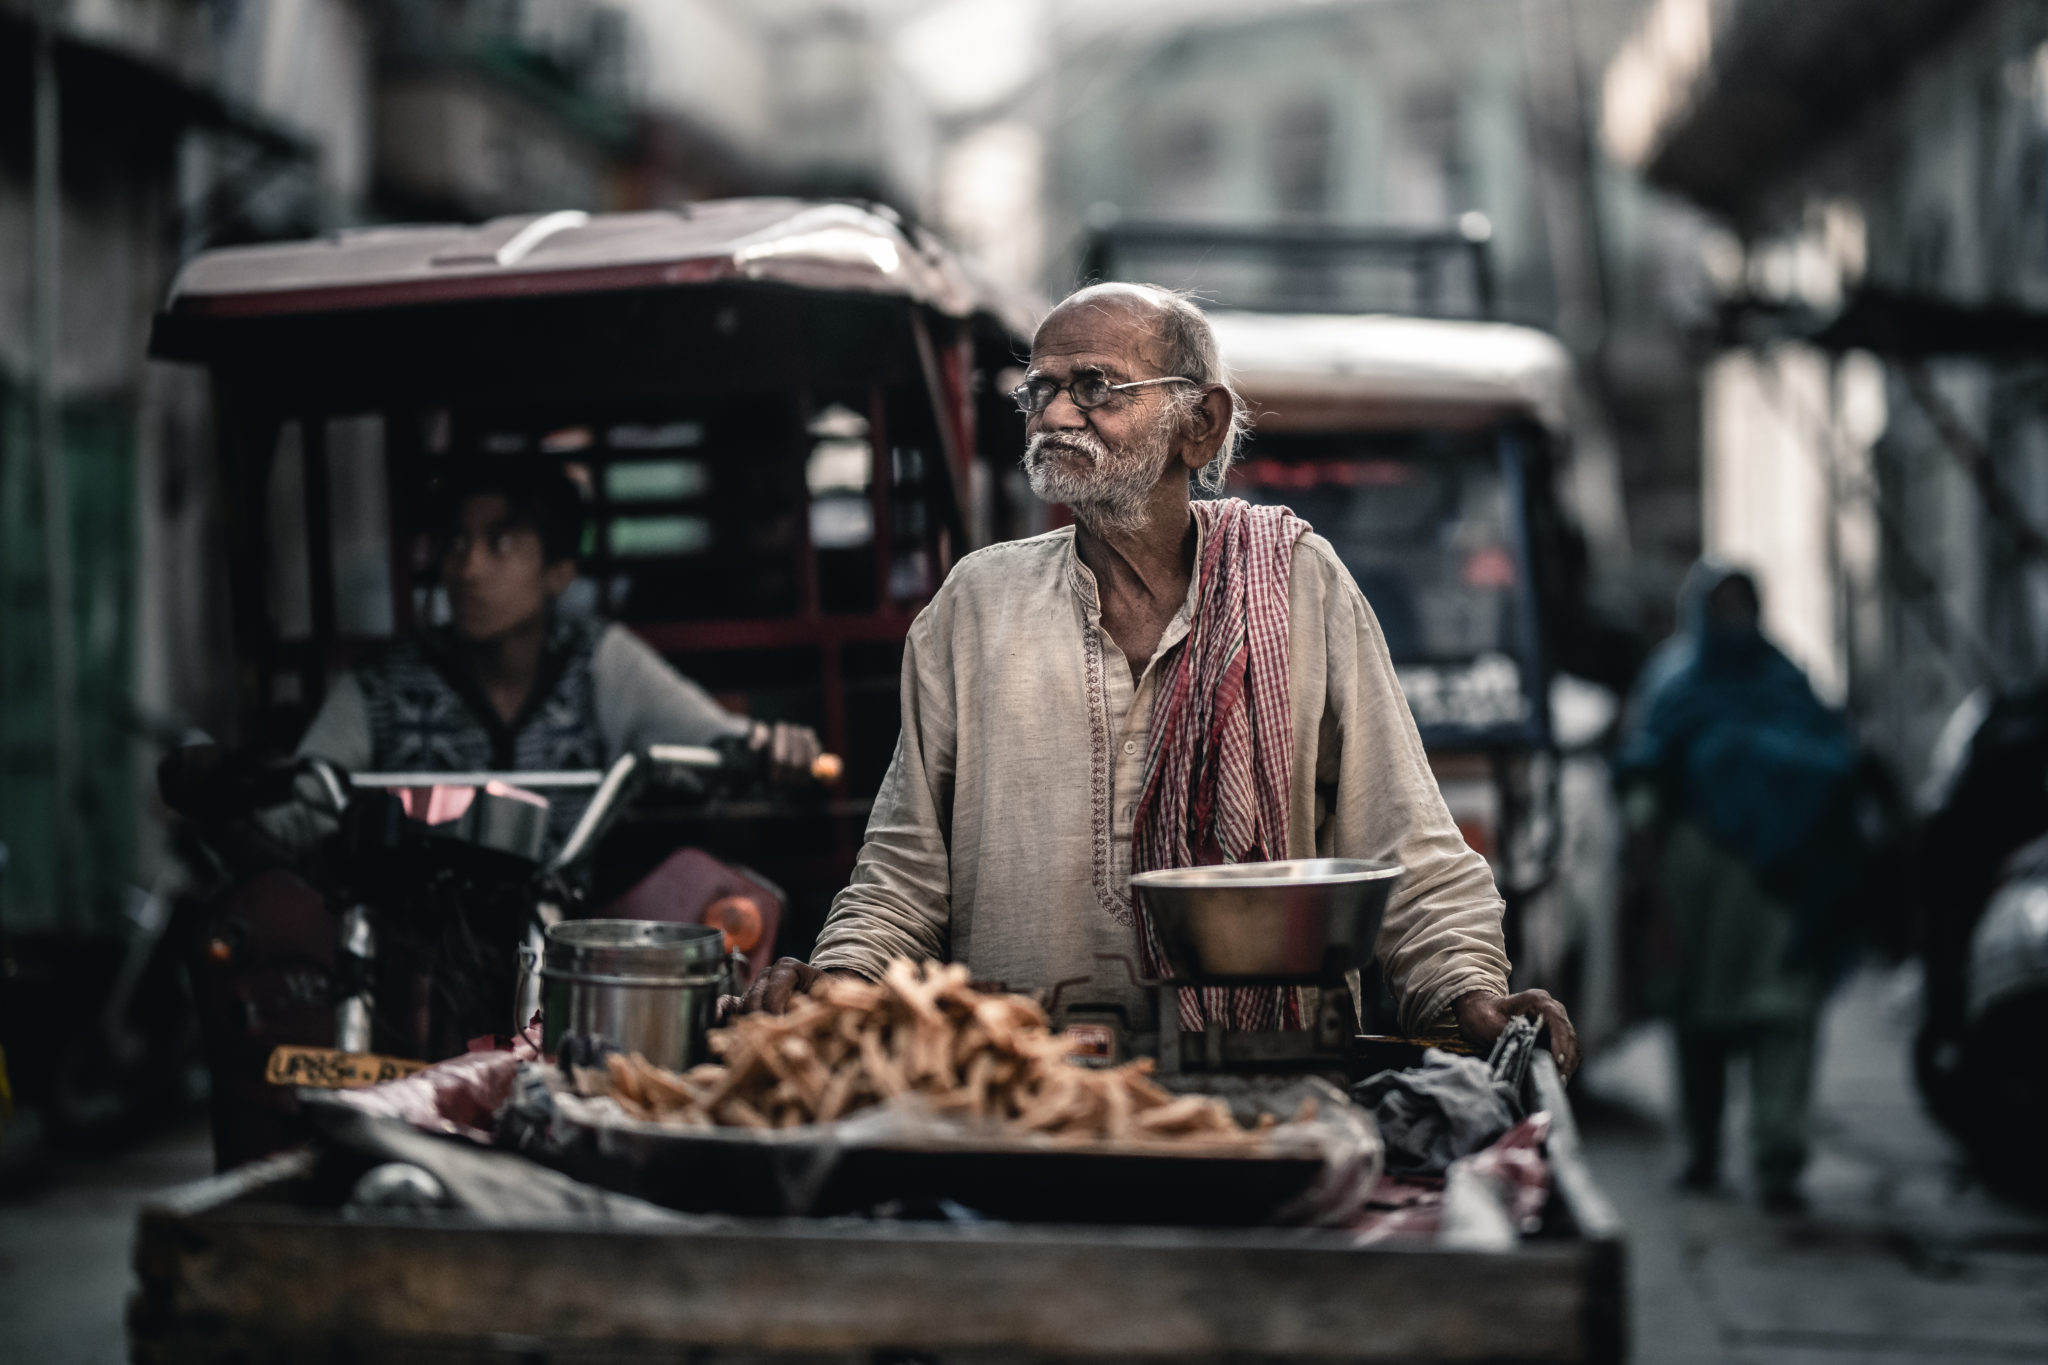 Street Photography in India - Andrew Studer